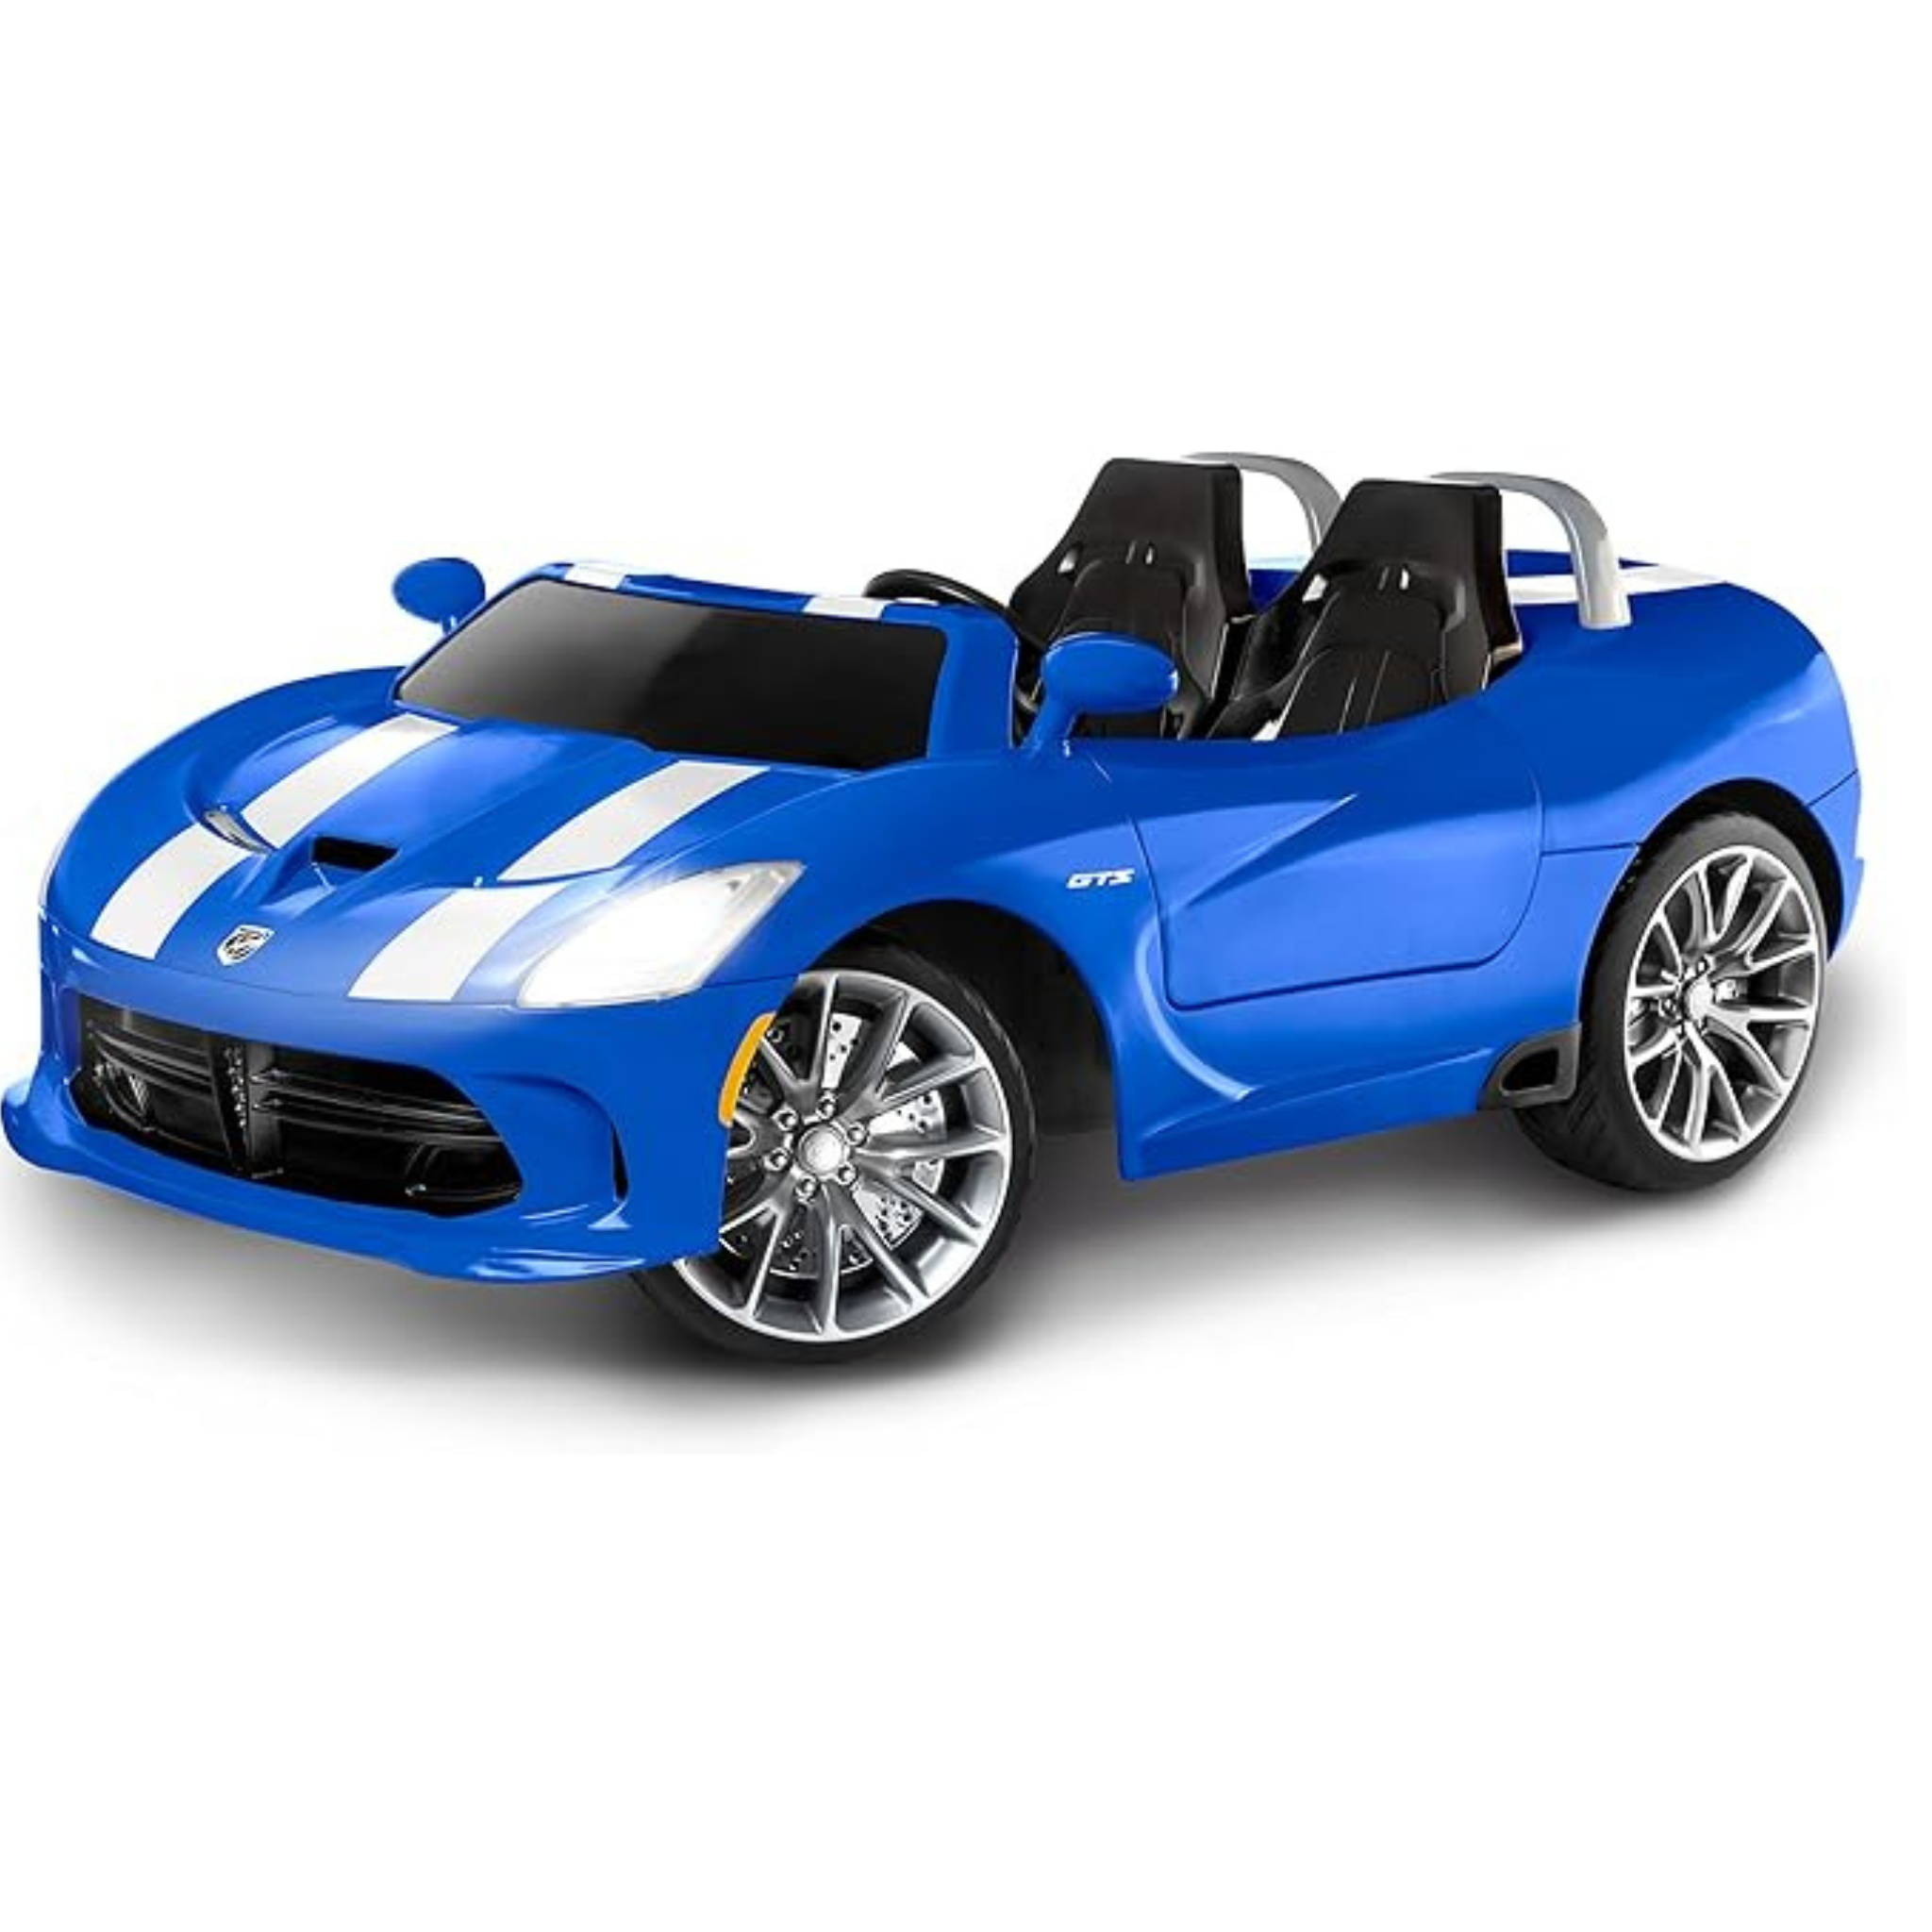 Dodge Viper SRT Convertible Toddler Ride On Toy